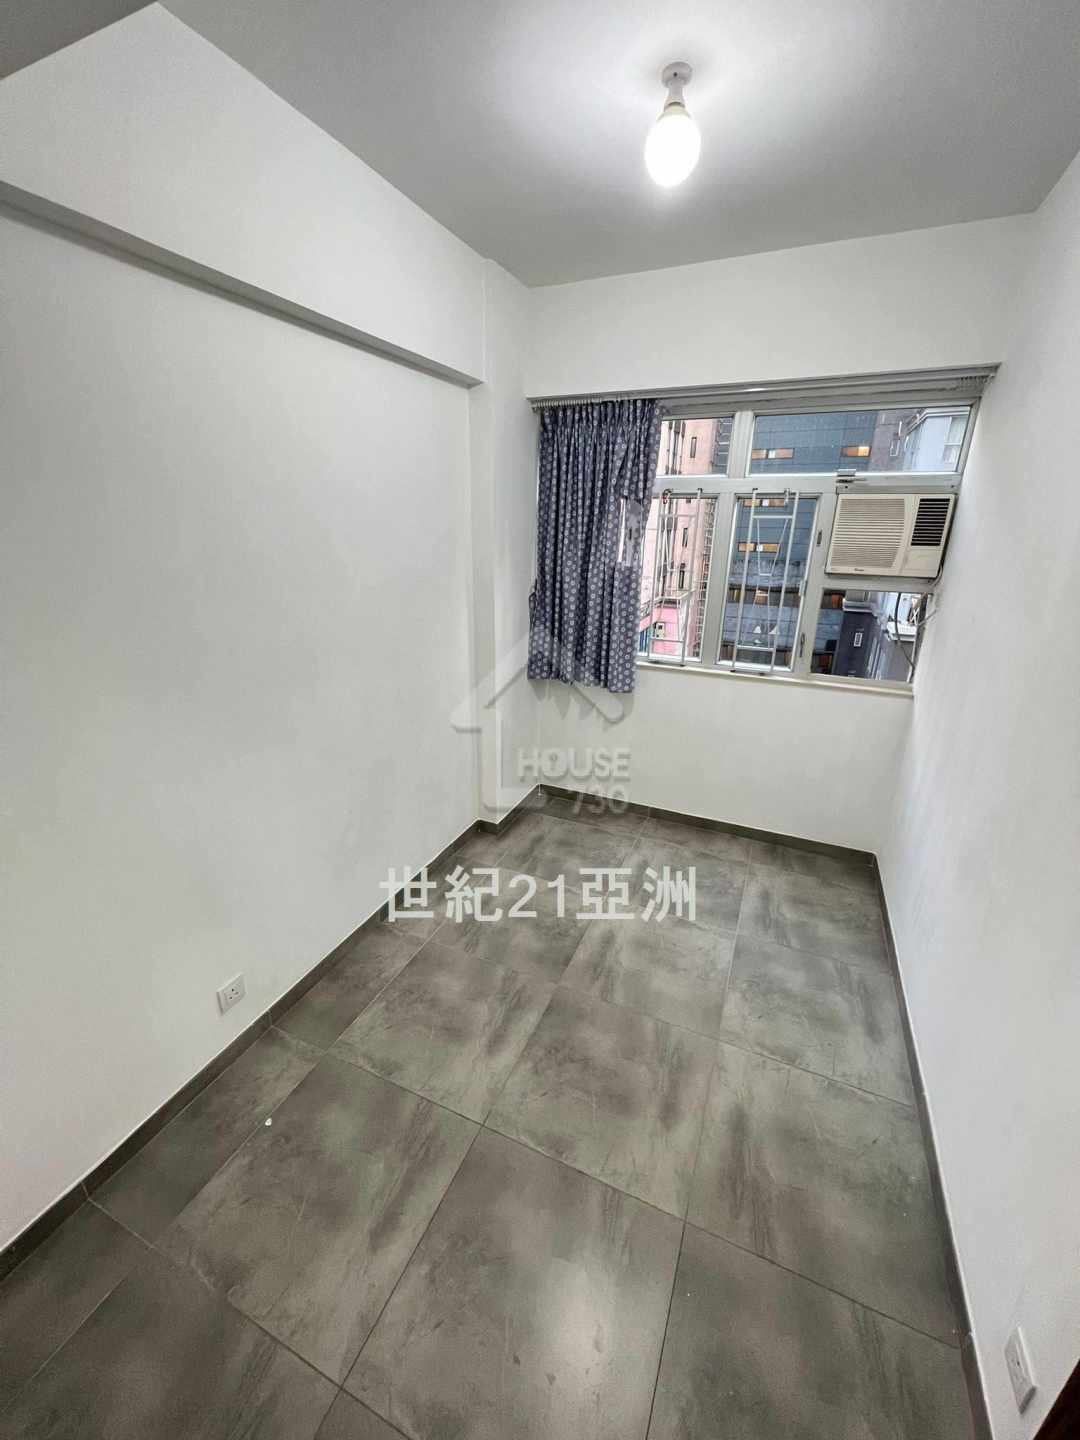 Wan Chai HENNESSY ROAD COURT Lower Floor Bedroom 1 House730-5925902